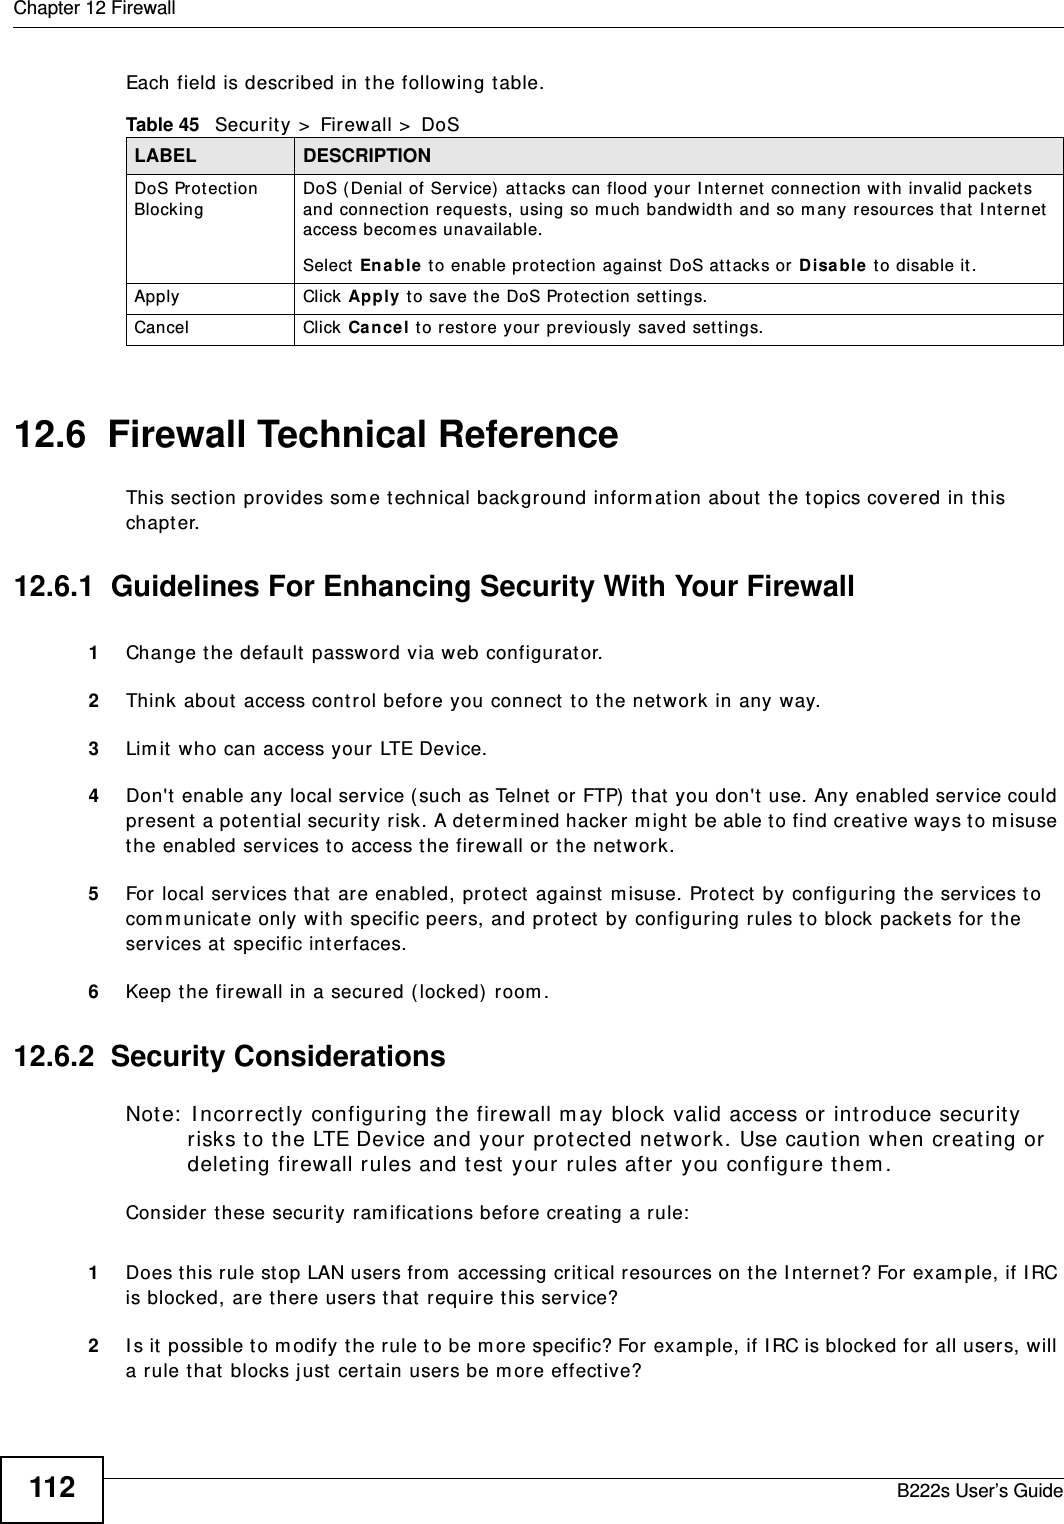 Chapter 12 FirewallB222s User’s Guide112Each field is described in t he following t able.12.6  Firewall Technical ReferenceThis sect ion provides som e t echnical background inform ation about t he t opics covered in t his chapt er.12.6.1  Guidelines For Enhancing Security With Your Firewall1Change t he default  password via web configurat or.2Think about  access control befor e you connect  t o t he net work in any way.3Lim it who can access your LTE Device.4Don&apos;t  enable any local service ( such as Telnet  or FTP)  t hat  you don&apos;t  use. Any enabled service could present  a pot ent ial security  risk. A det erm ined hacker m ight  be able to find creat ive ways to m isuse the enabled services to access t he firewall or t he net work.5For local services t hat  are enabled, pr ot ect against  m isuse. Prot ect by configuring t he ser vices to com municate only wit h specific peers, and protect  by configuring rules t o block packets for  t he services at  specific int erfaces.6Keep t he firewall in a secured (locked)  room .12.6.2  Security ConsiderationsNote:  I ncorrectly configuring t he firewall m ay block valid access or introduce securit y risks to the LTE Device and your protected net work. Use caution when creat ing or delet ing firewall rules and t est  your rules after you configure t hem .Consider t hese securit y ram ifications before creat ing a rule:1Does t his rule stop LAN users from  accessing crit ical r esources on t he I nt ernet ? For exam ple, if I RC is blocked, are t here users t hat  require t his service?2I s it  possible t o m odify t he rule t o be m ore specific? For exam ple, if I RC is blocked for  all users, will a rule t hat  blocks j ust cert ain users be m ore effect ive?Table 45   Security &gt;  Firewall &gt;  DoSLABEL DESCRIPTIONDoS Prot ect ion BlockingDoS ( Denial of Service)  att acks can flood your  I nt ernet  connect ion w it h invalid packets and connection request s, using so m uch bandwidt h and so m any resources t hat I nt ernet access becom es unavailable. Select  En able to enable prot ect ion against DoS at t acks or  D isa ble to disable it .Apply Click Apply to save t he DoS Prot ect ion set t ings.Cancel Click Ca nce l t o rest ore your  previously saved set t ings.